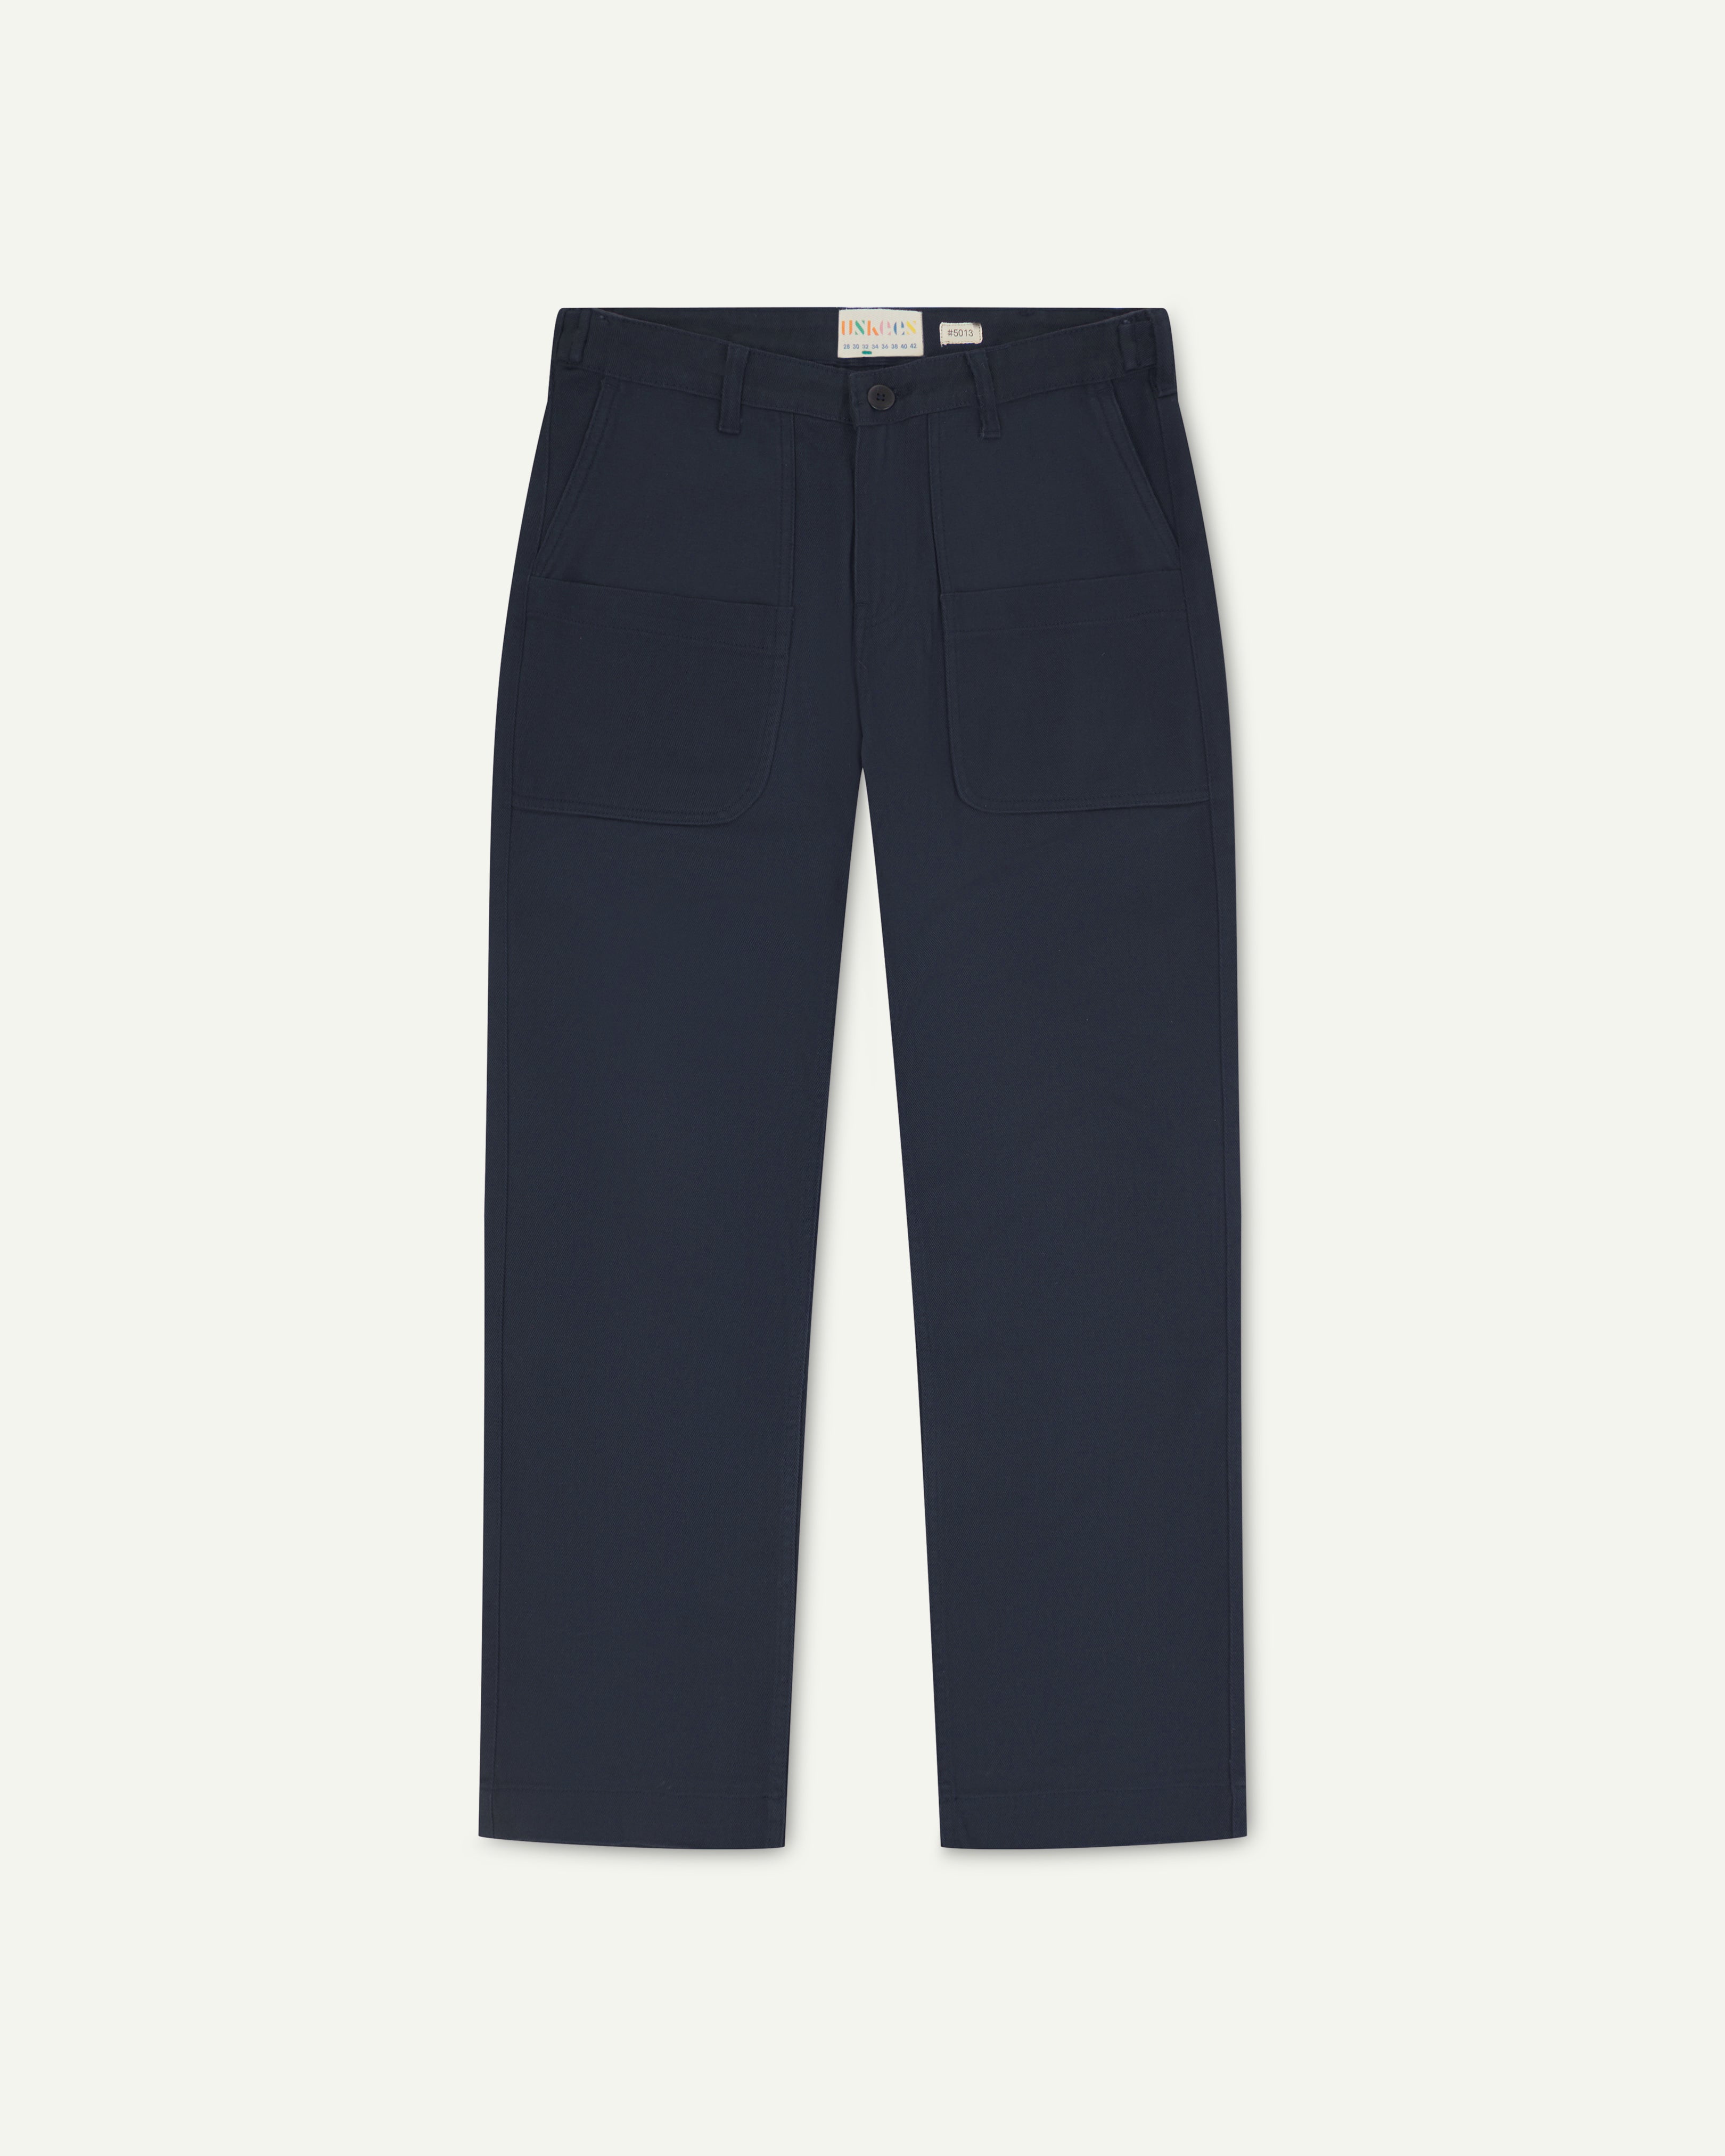 Flat shot of uskees dark blue drill trousers for men showing label at waistband